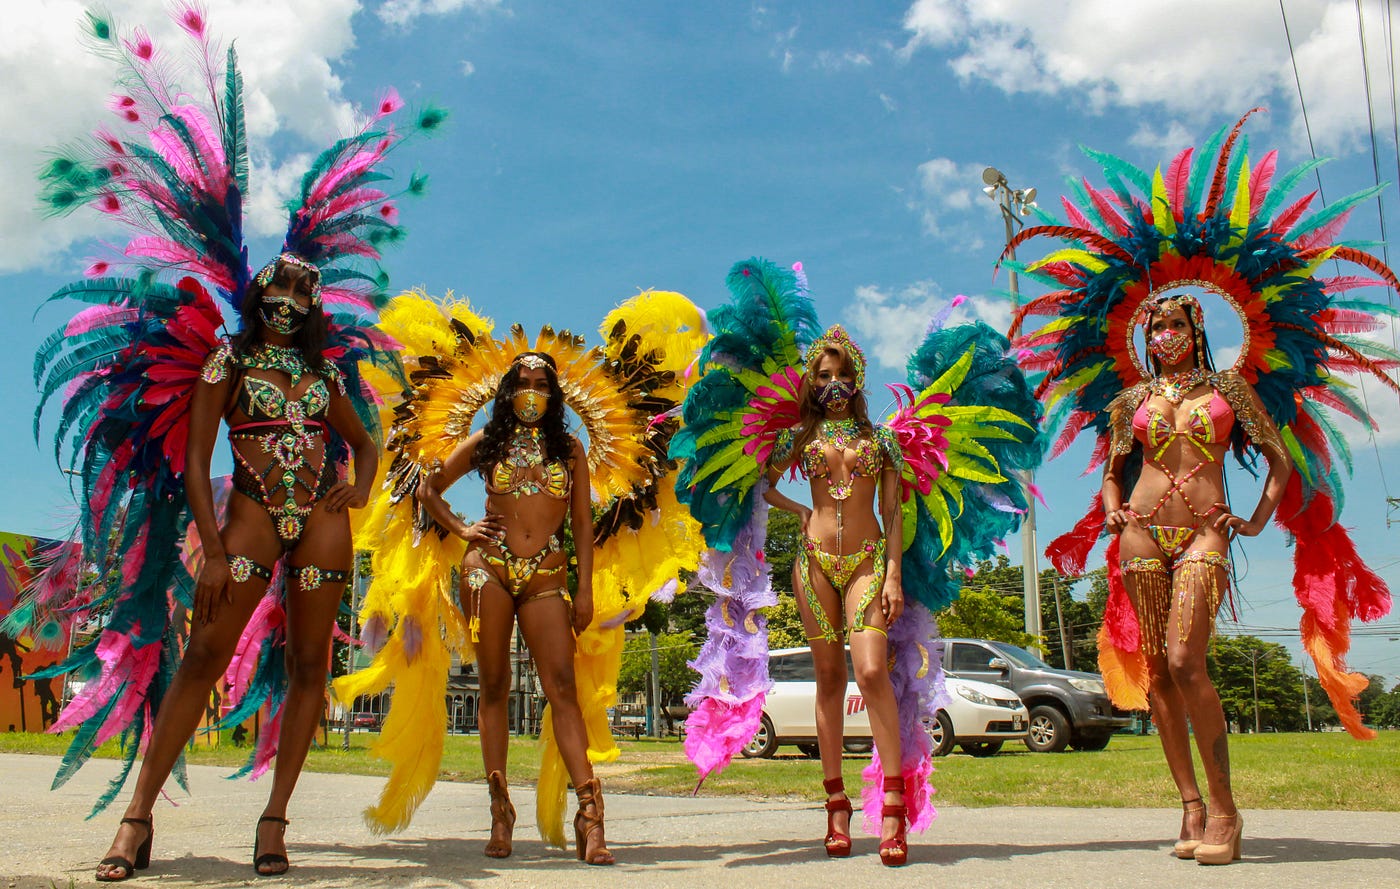 Mystique of the Fete! Discover the Top 8 Island Carnivals in the